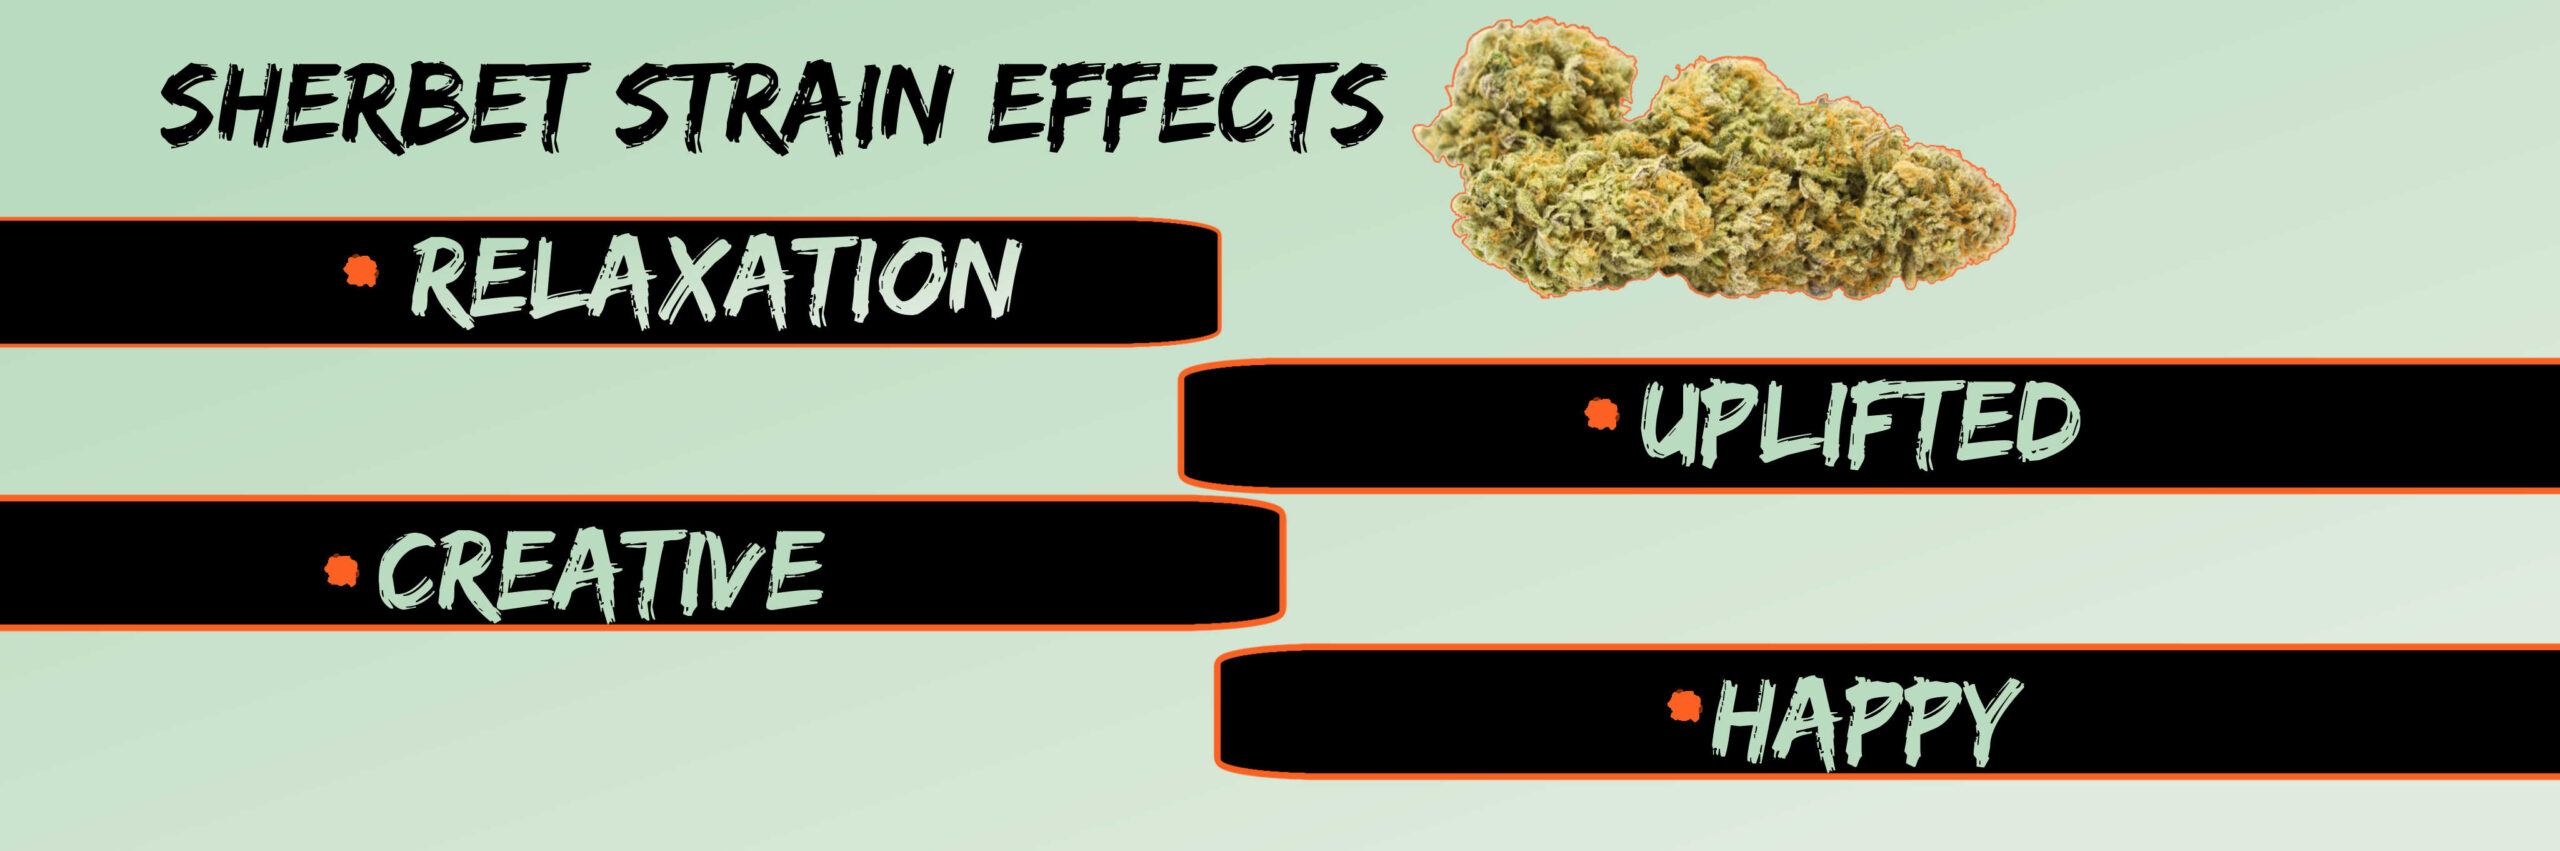 image of sherbet strain effects